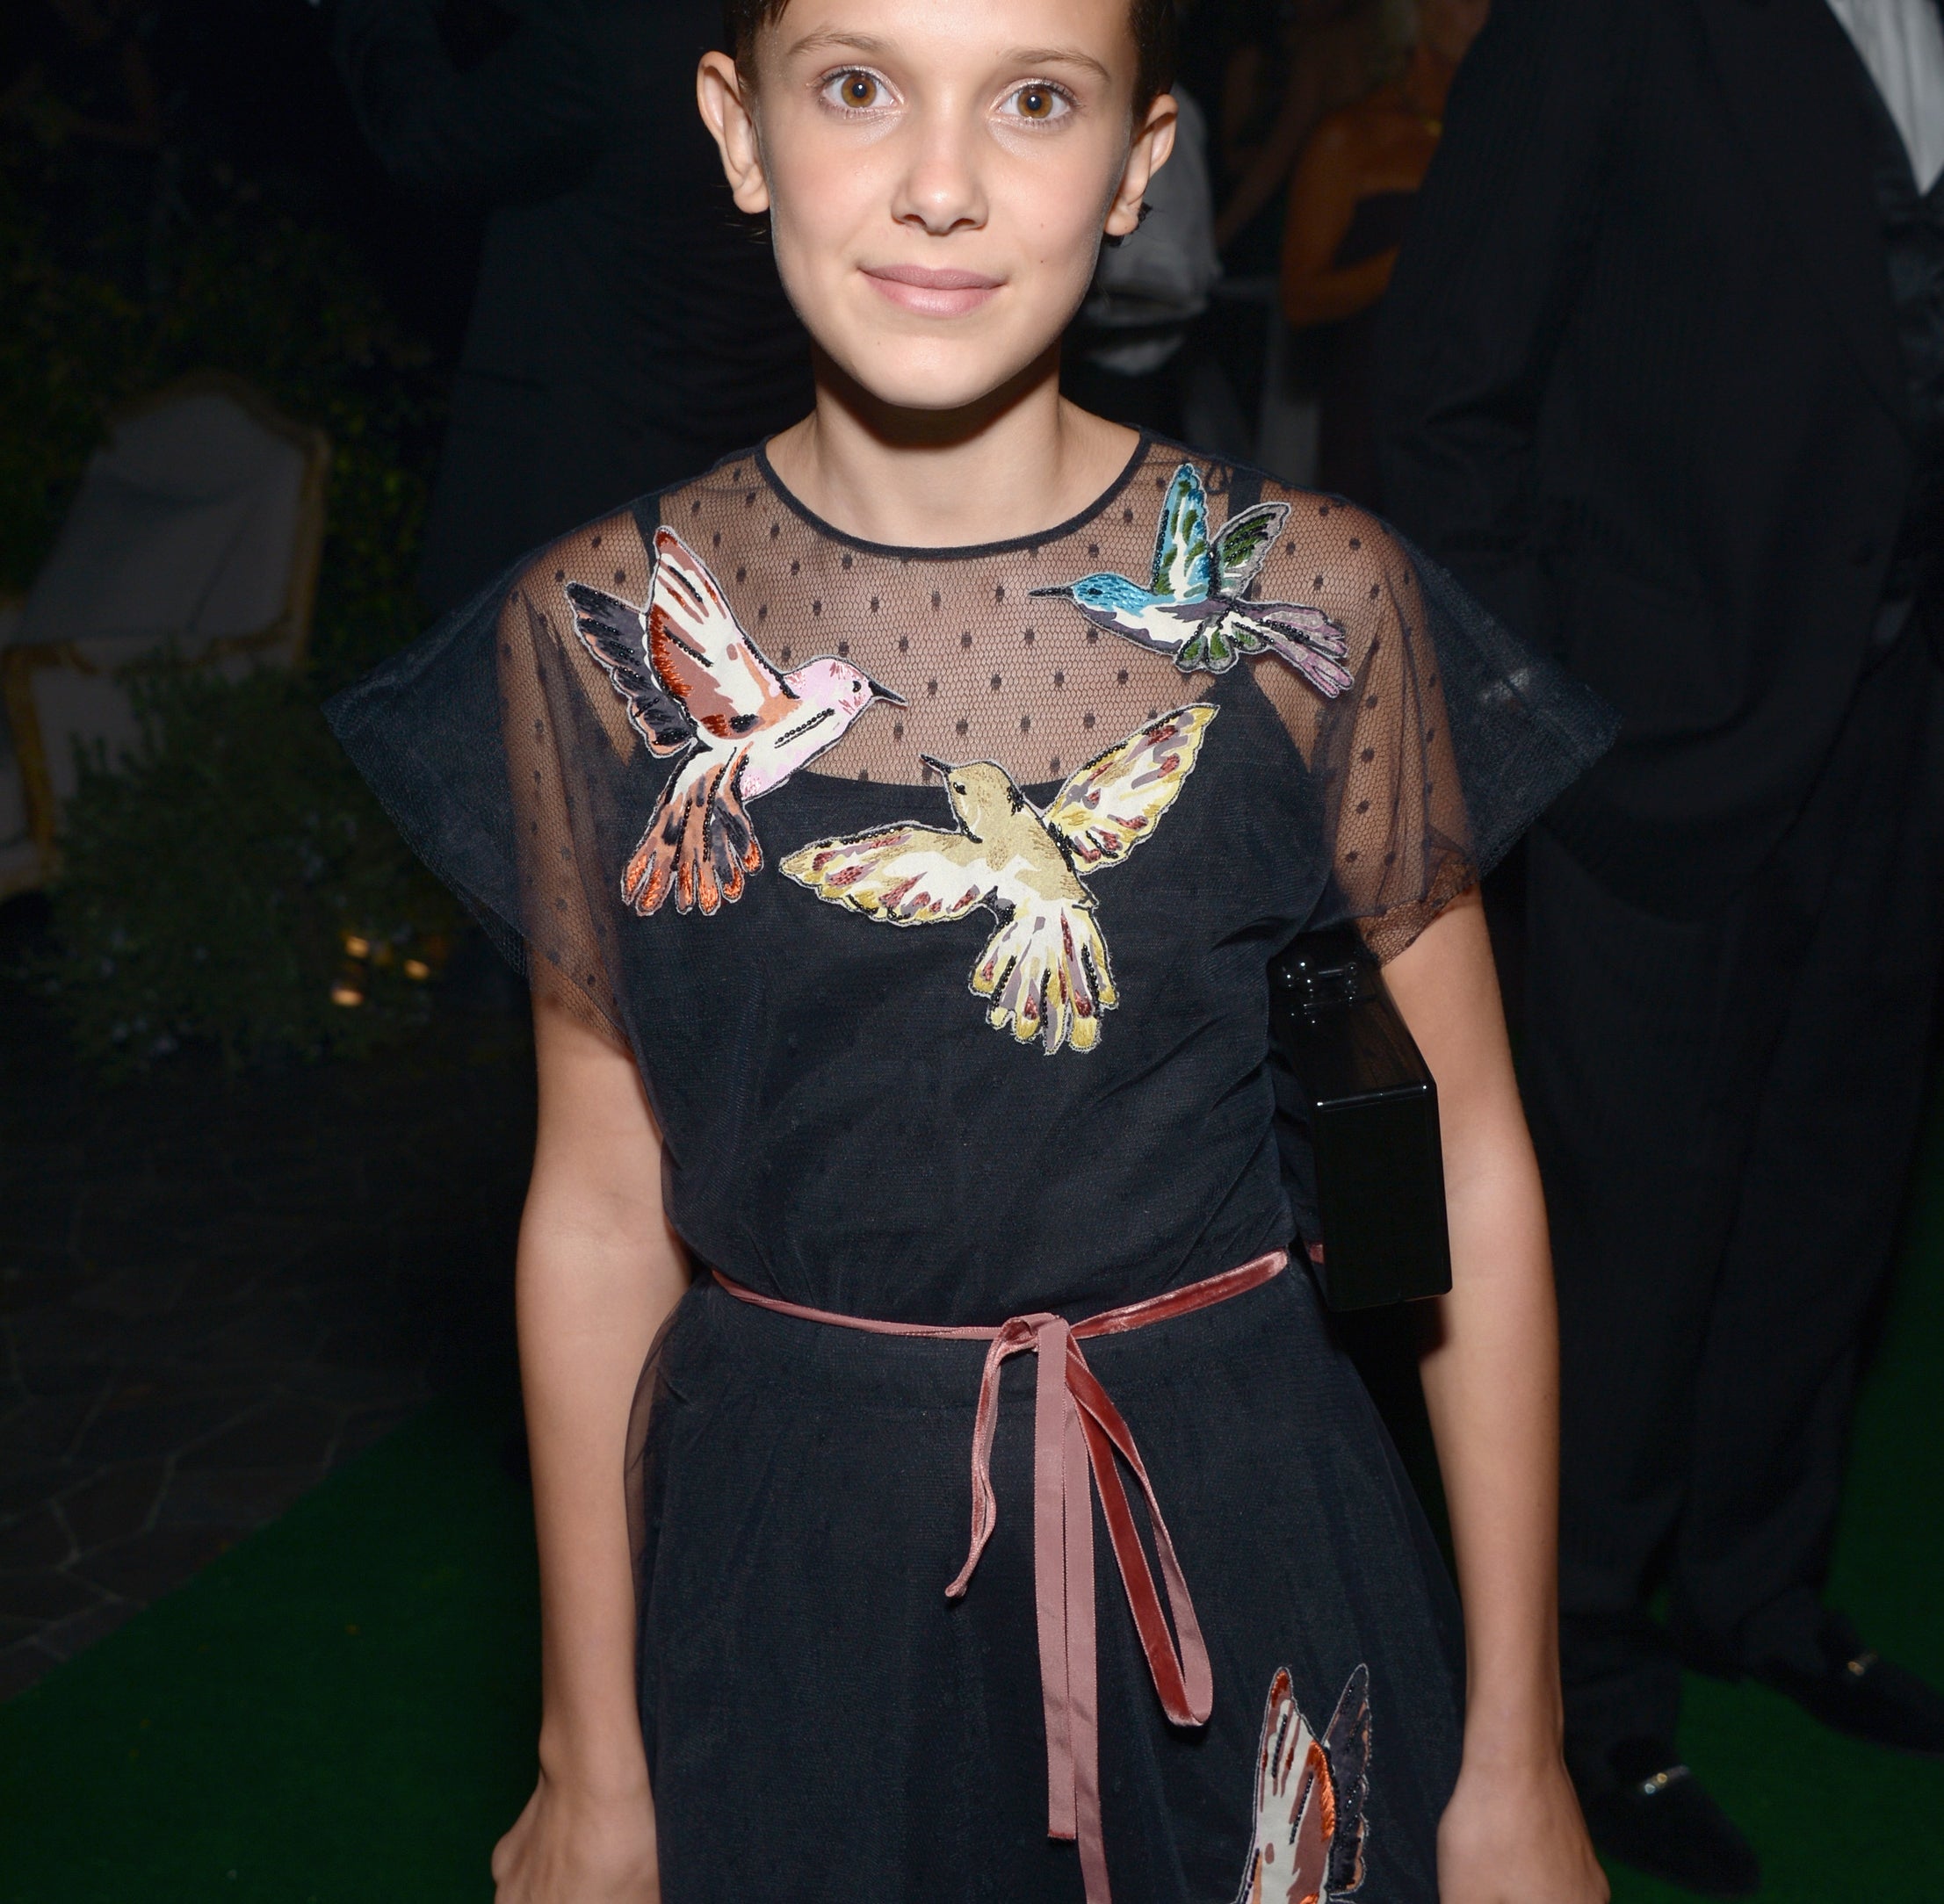 younger millie at an event